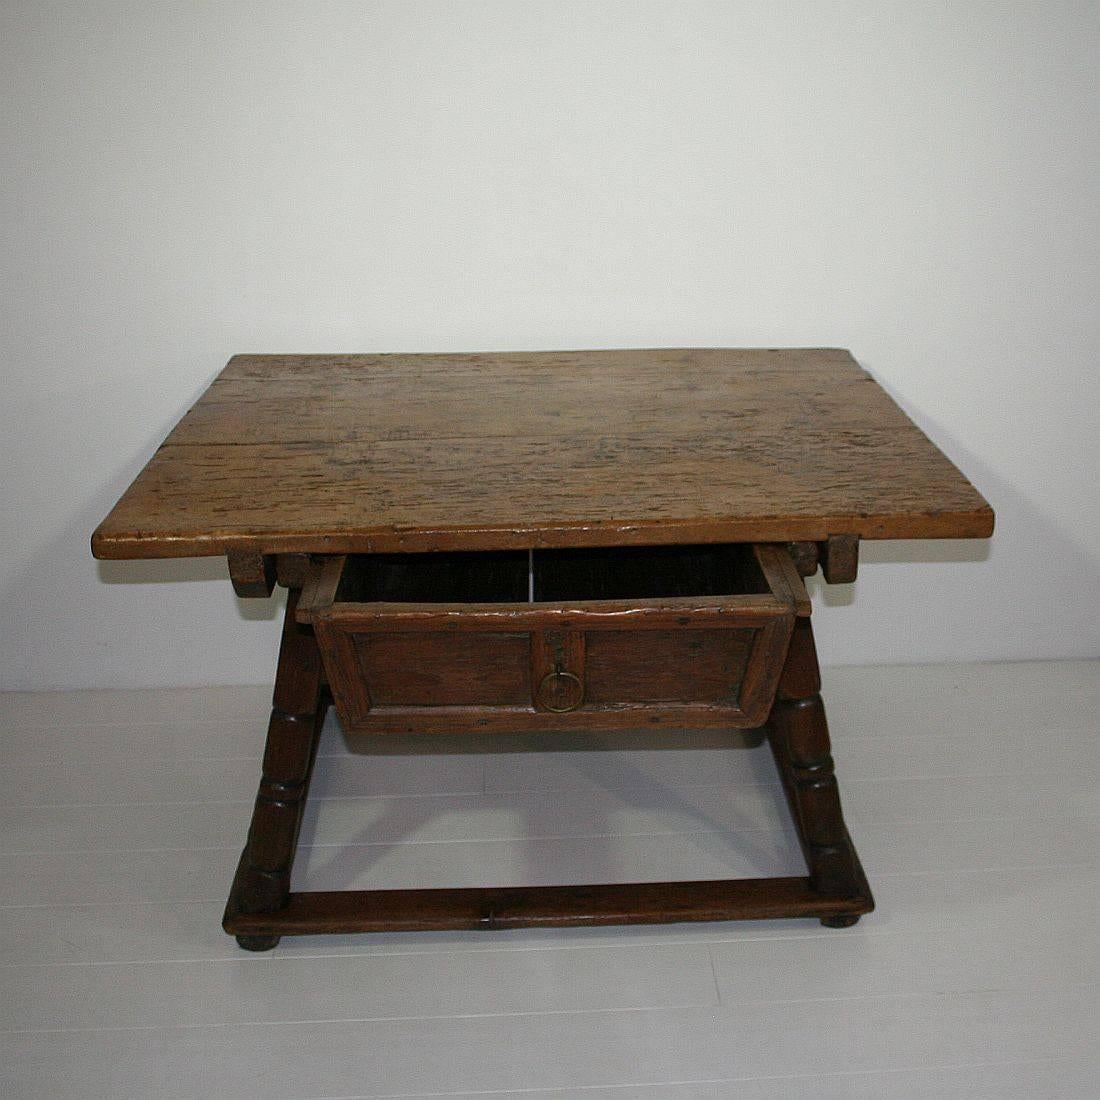 Beautiful and rare Austrian payment table with drawer,
Austria, circa 1750.
Weathered and small old repairs. Treated against woodworm on 25 June 1980 (visible stamp on photo)
More pictures available on request.